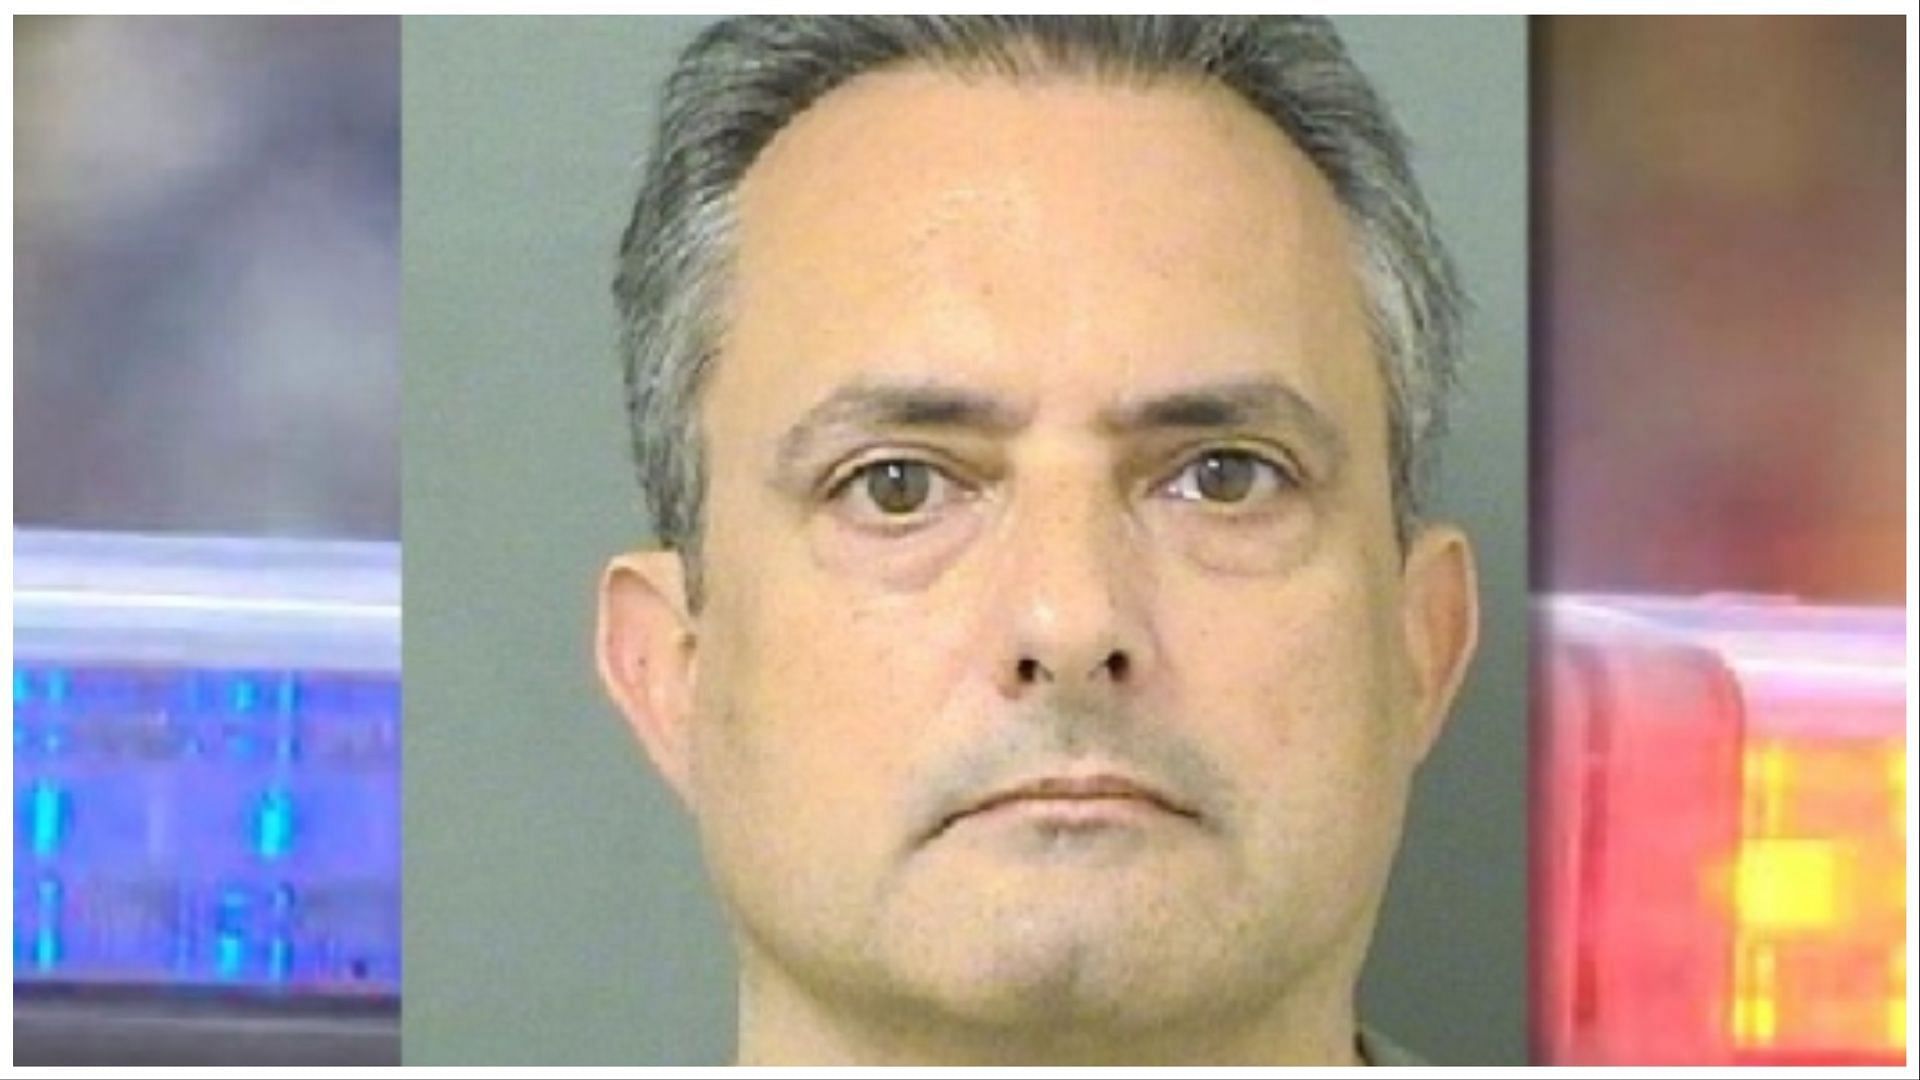 What did Charles Maglio do? Wellington High School teacher arrested over "unlawful" activity with 16-year-old girl